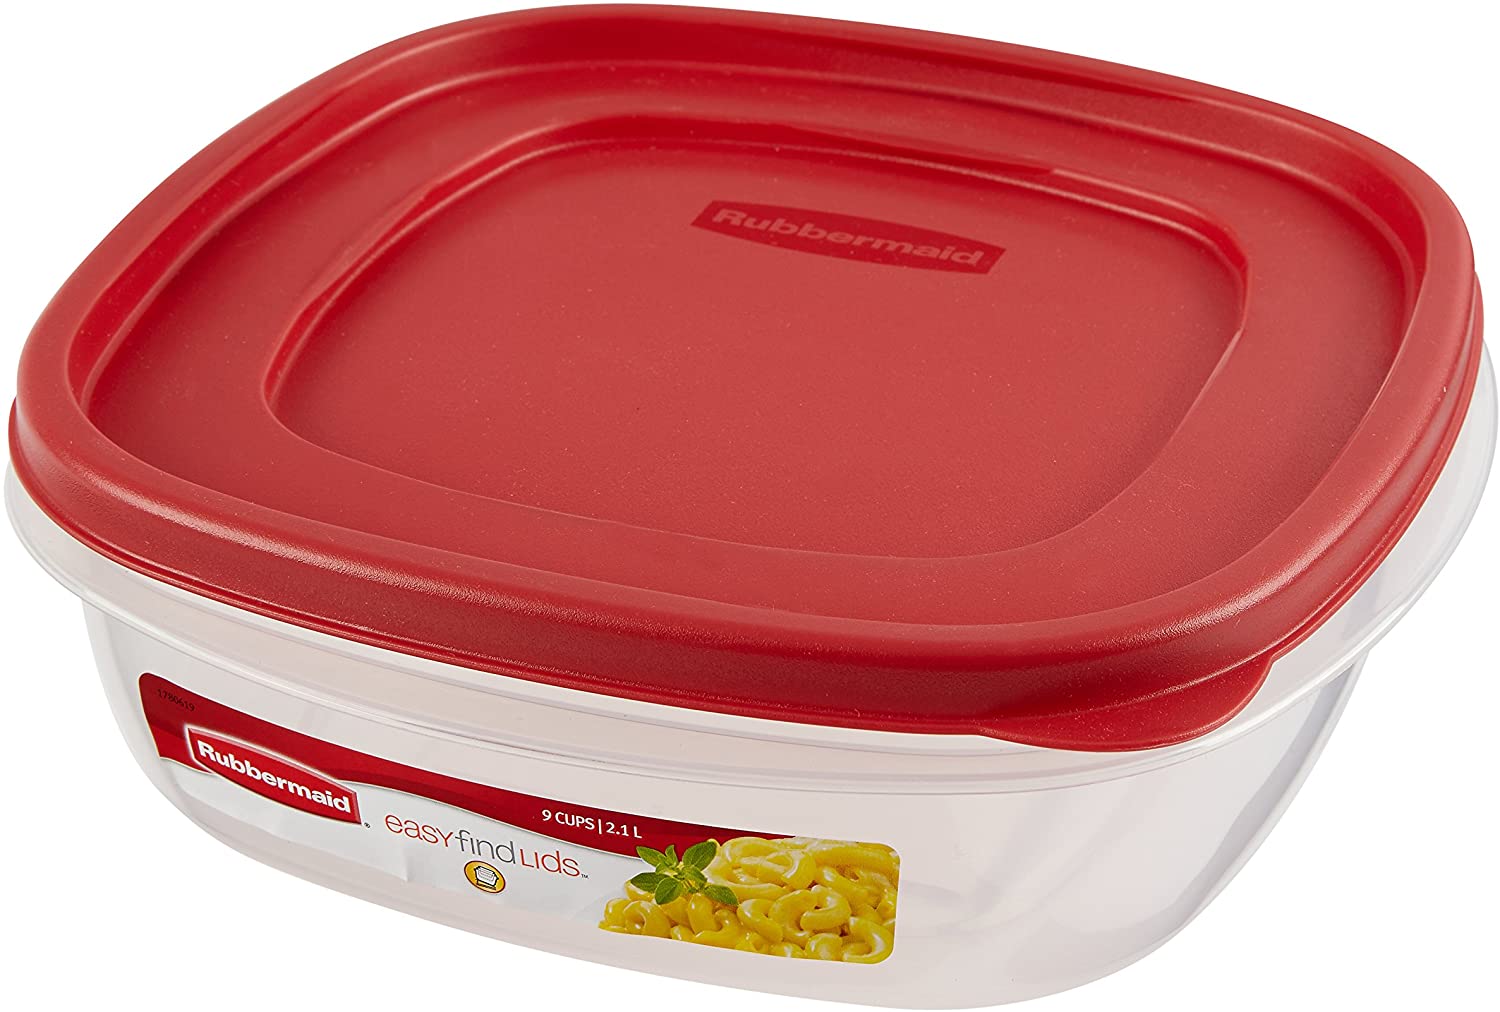 Rubbermaid EasyFindLids Food Storage Container, 2.12 L - Whole and All